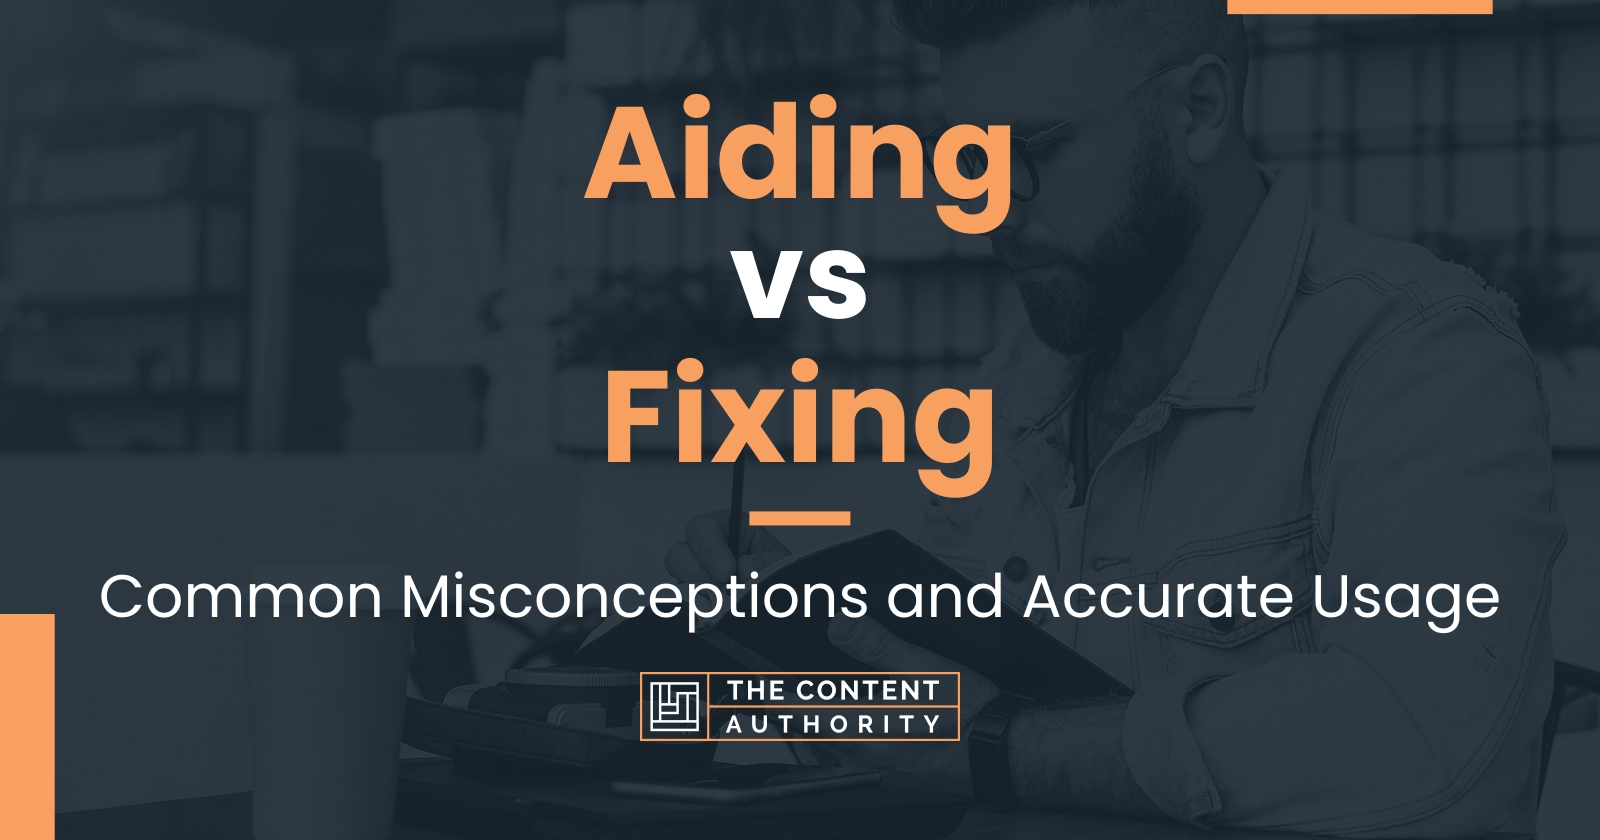 Aiding vs Fixing: Common Misconceptions and Accurate Usage